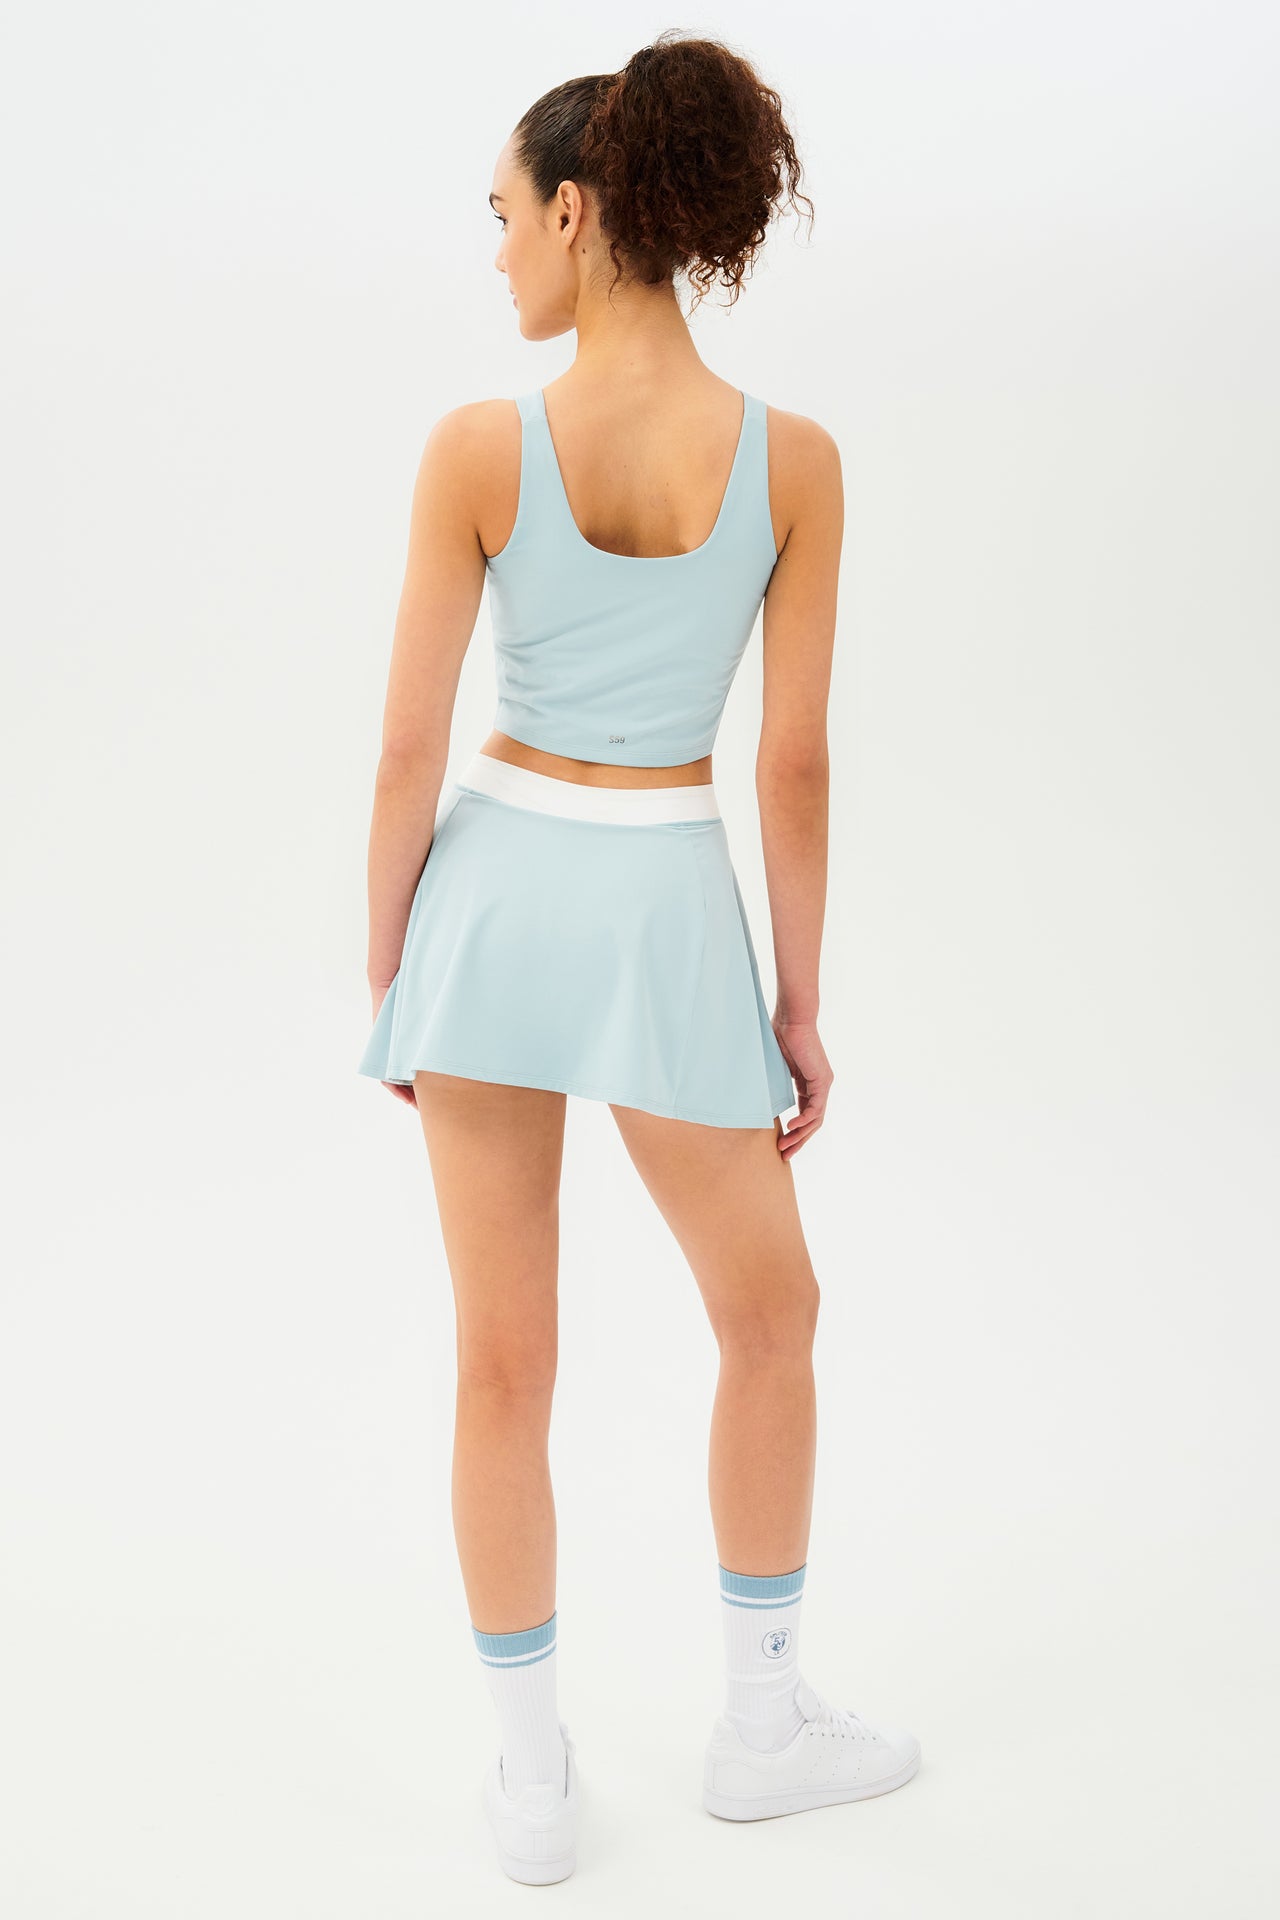 Back full view of woman with dark curly hair in a ponytail wearing a cropped teal tank bra with teal skort with white details on the waistband and logo. Model is wearing white socks with teal stripe and all white shoes